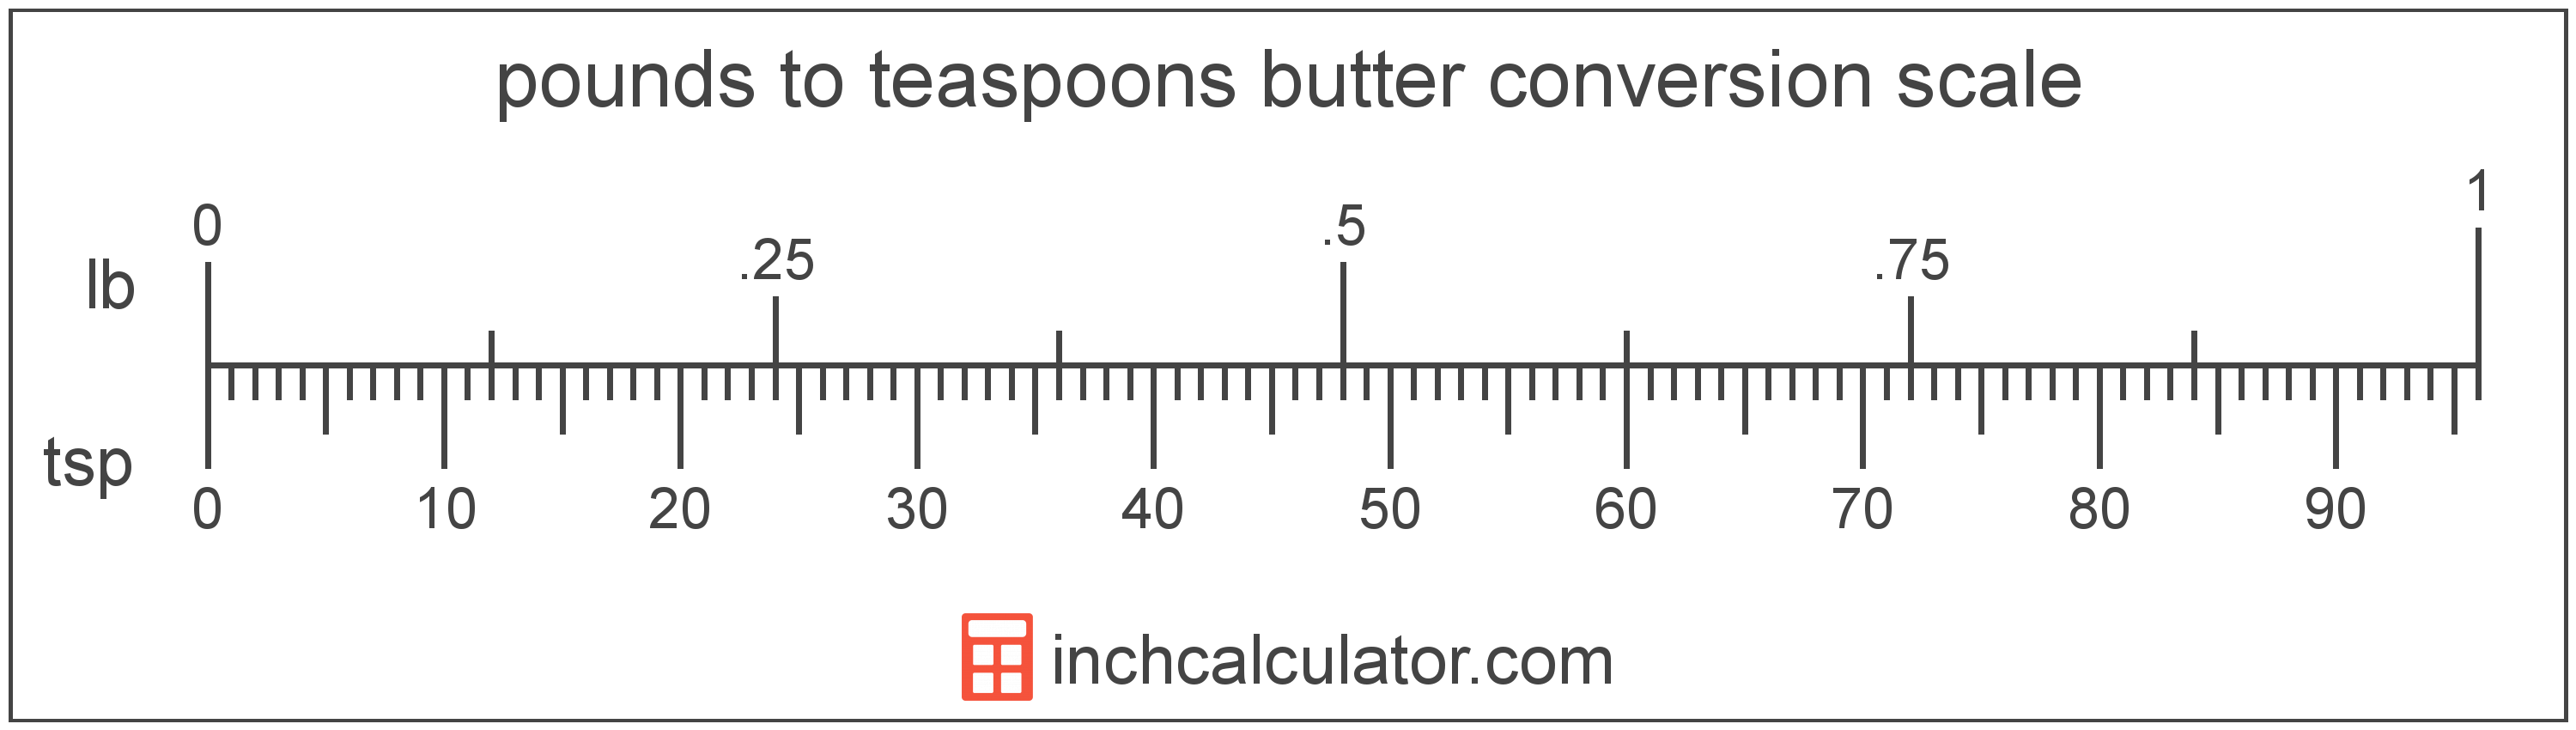 conversion scale showing teaspoons and equivalent pounds butter values